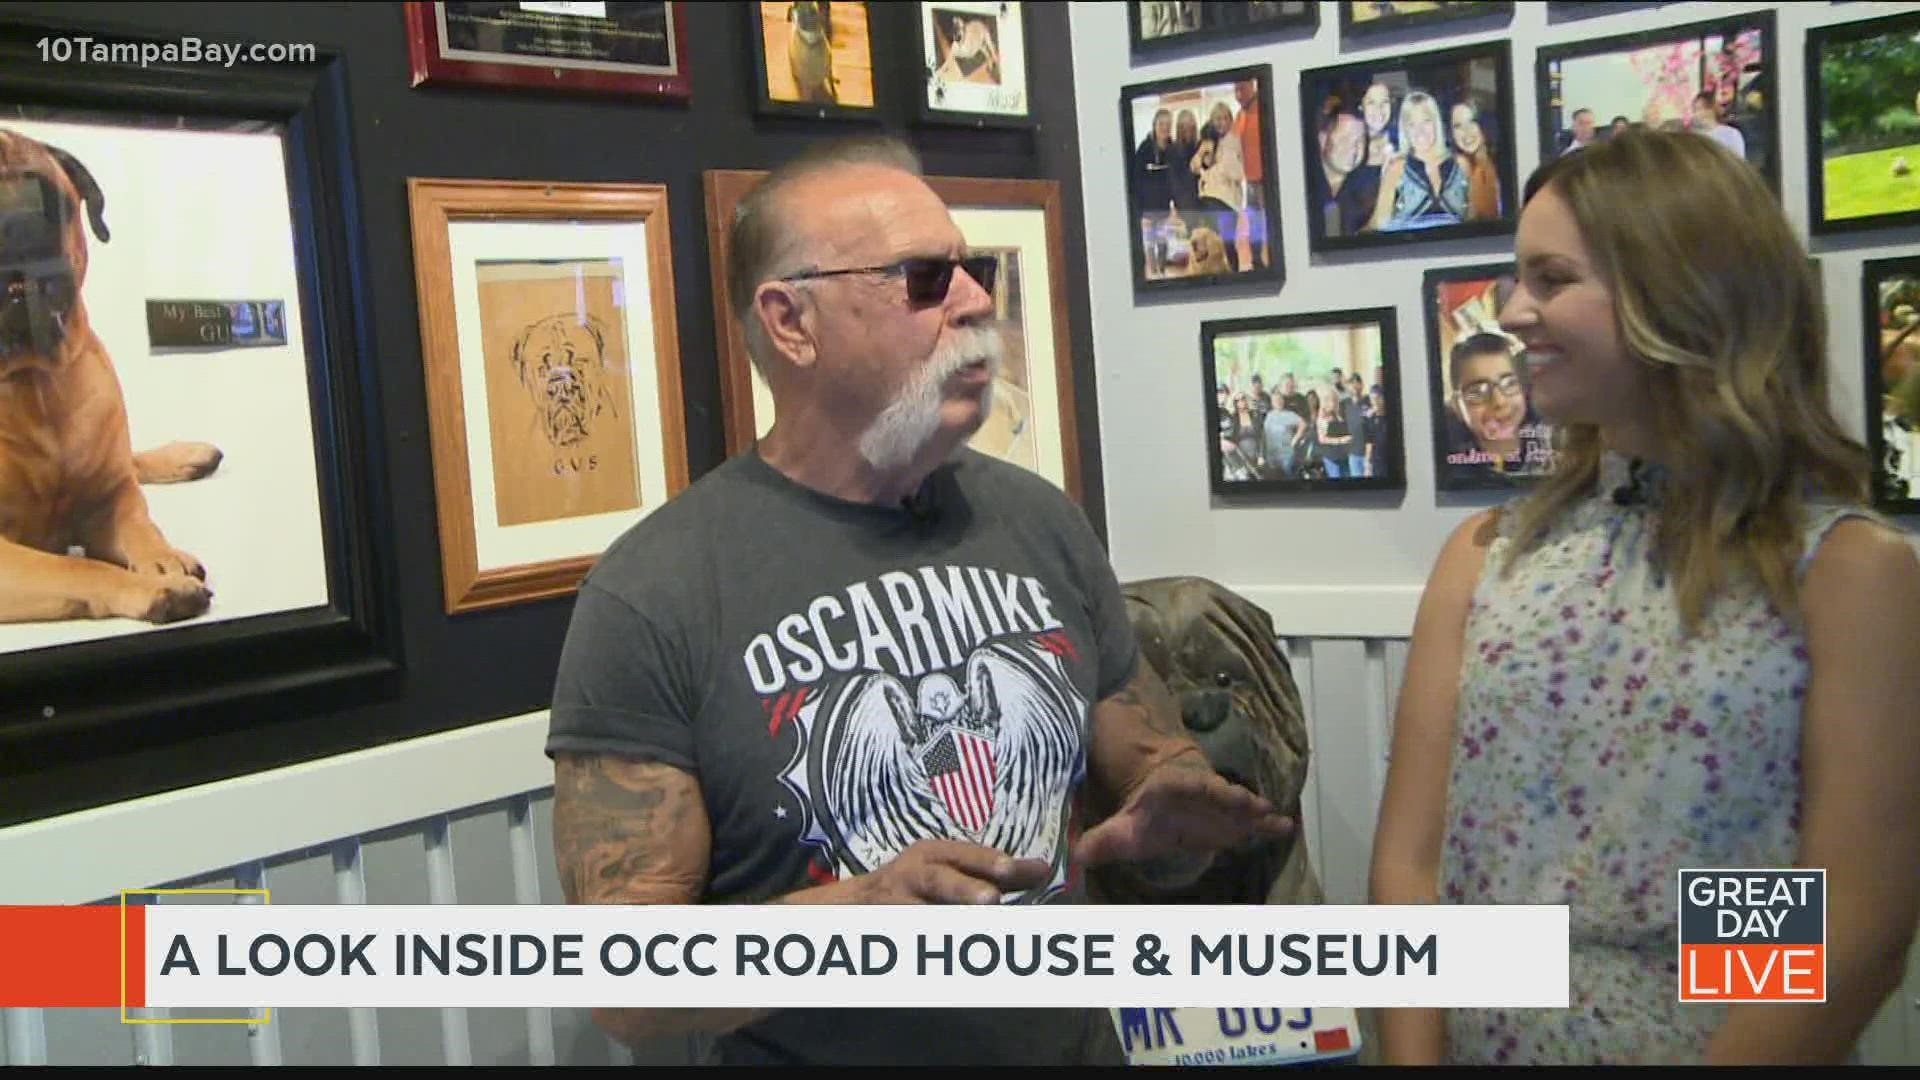 "American Chopper" star opens OCC Road House and Museum in Pinellas Park